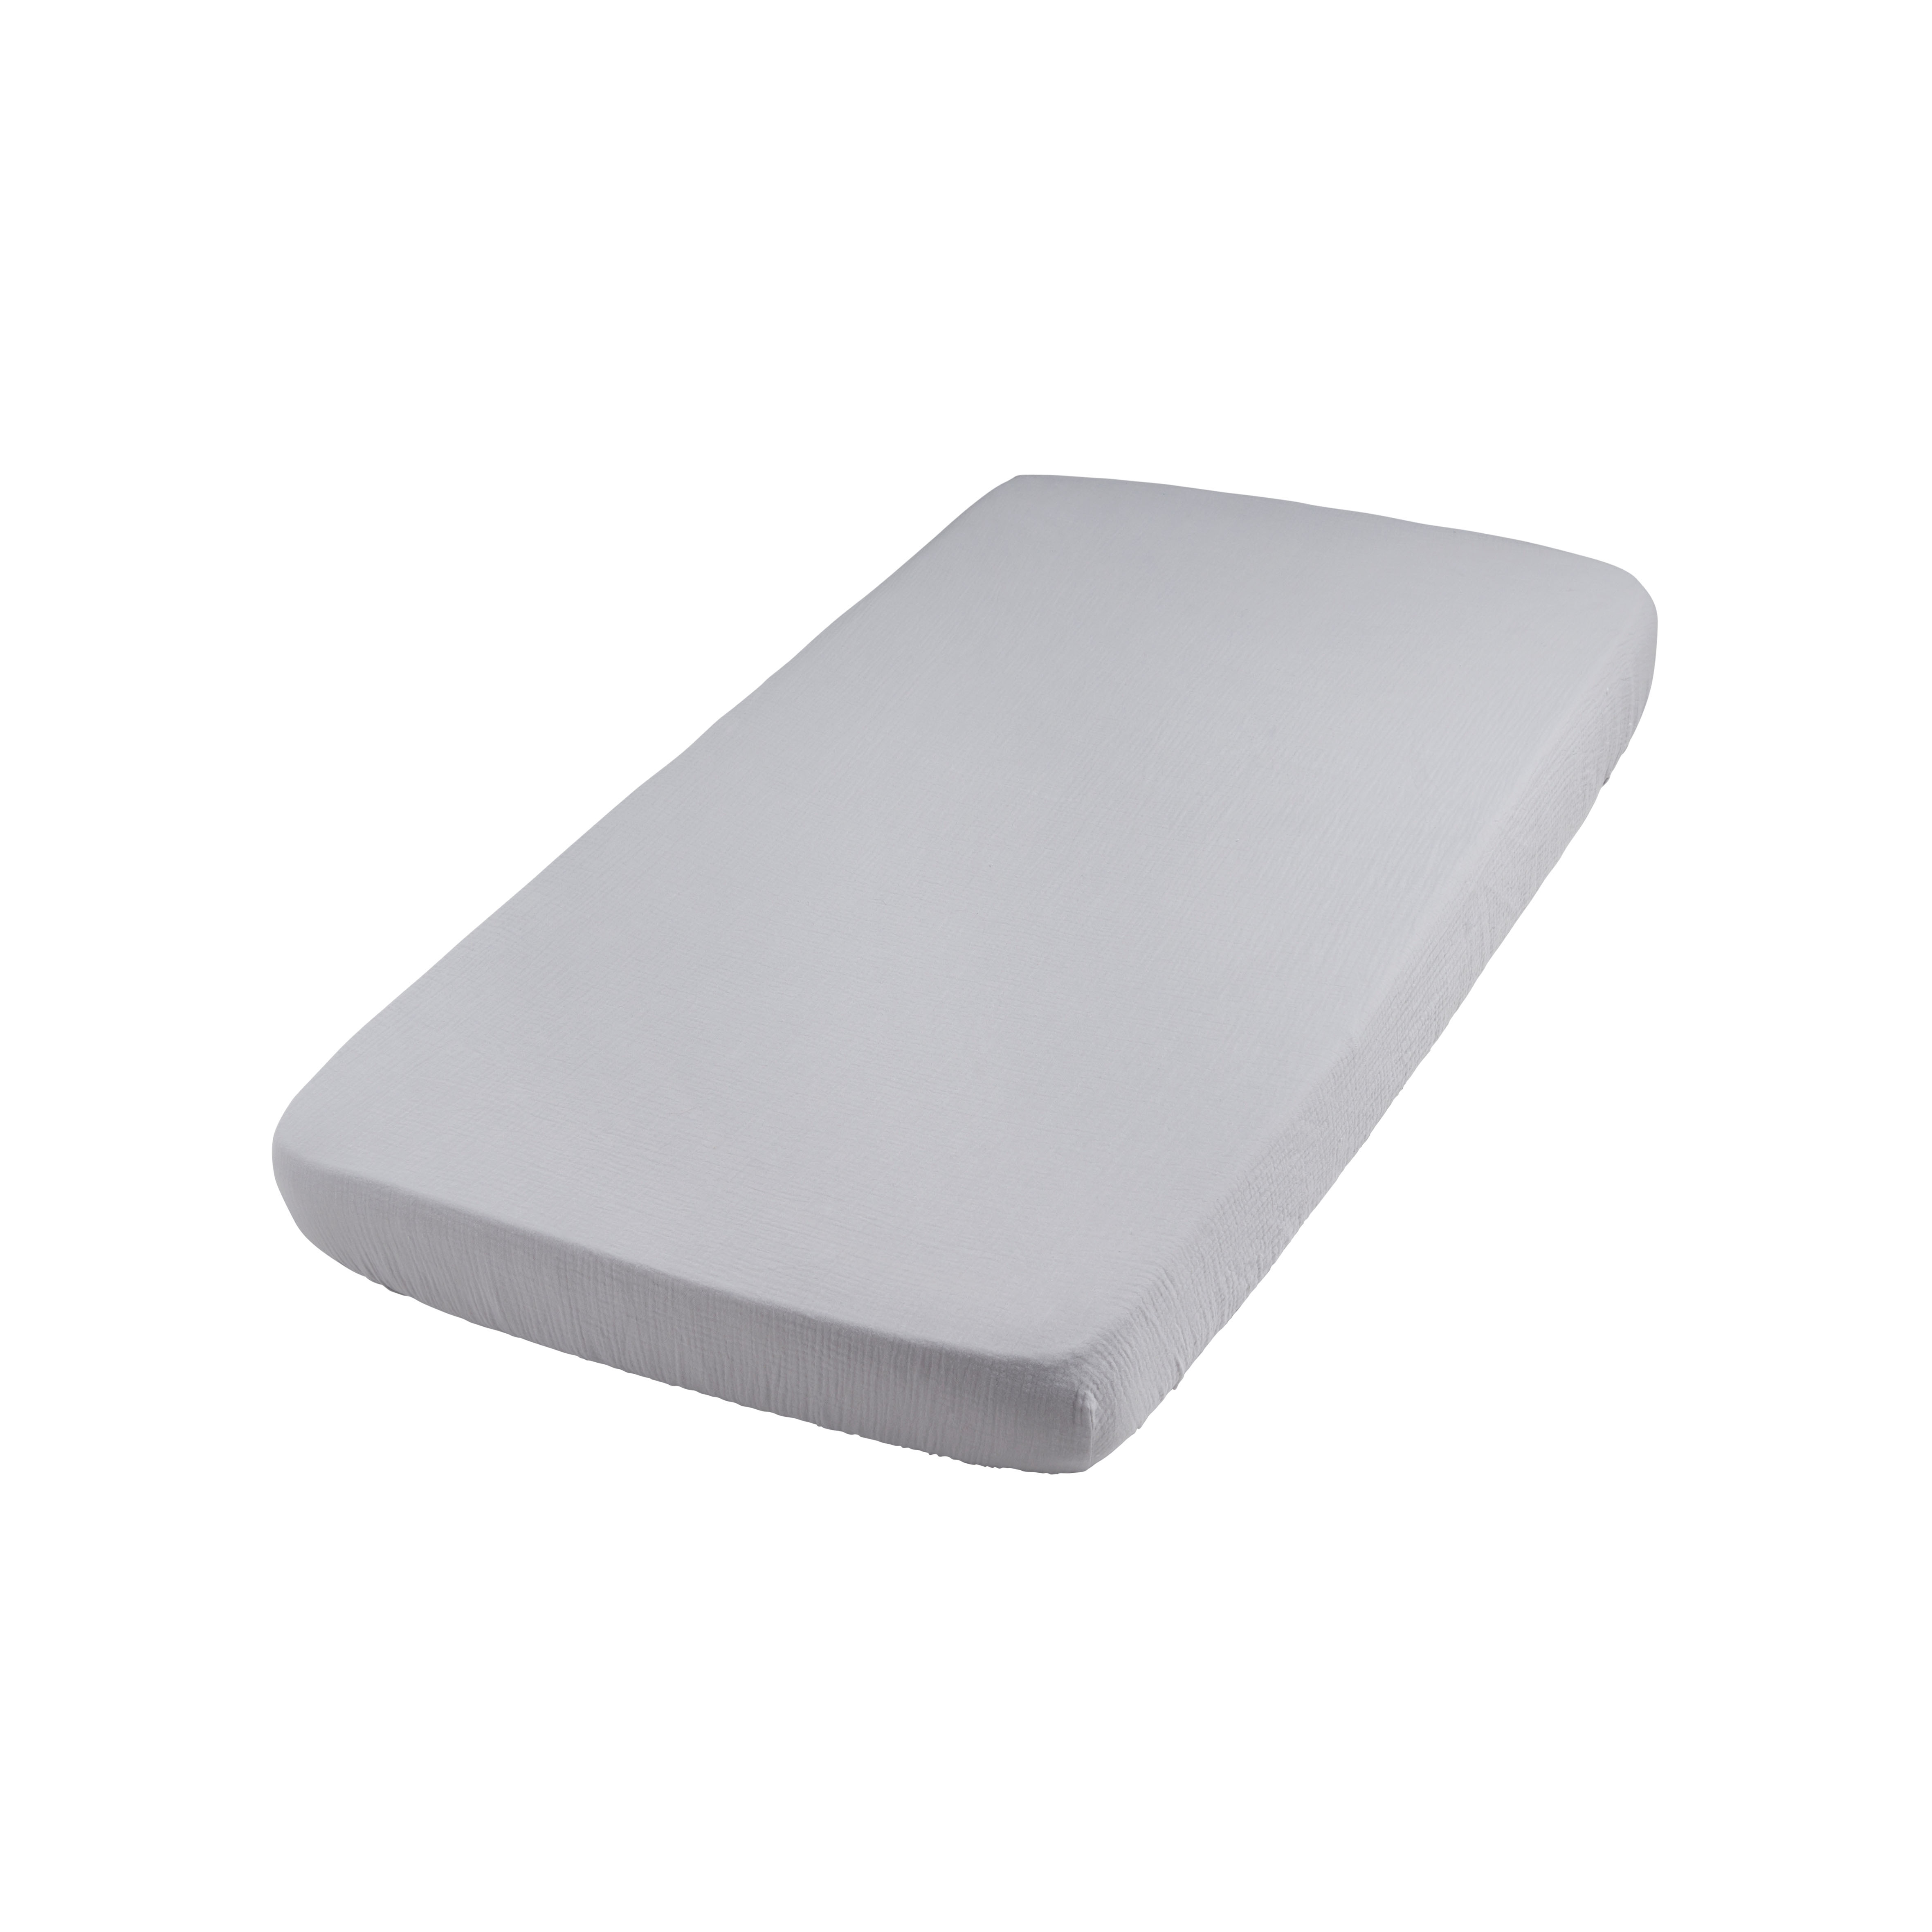 Fitted sheet Breeze grey - 40x80